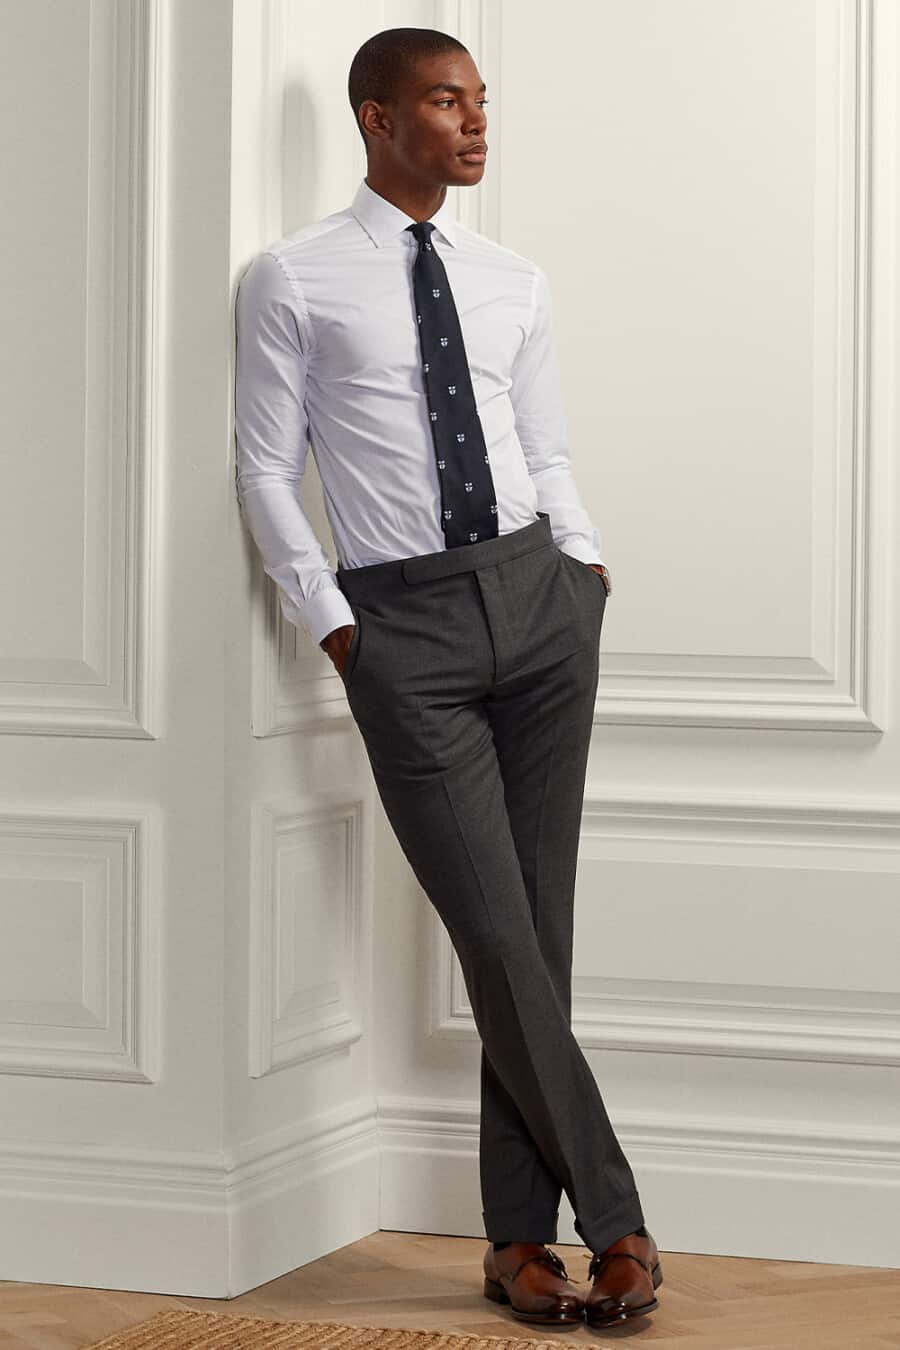 Men's grey dress pants, white shirt, patterned navy tie and brown monk strap shoes outfit